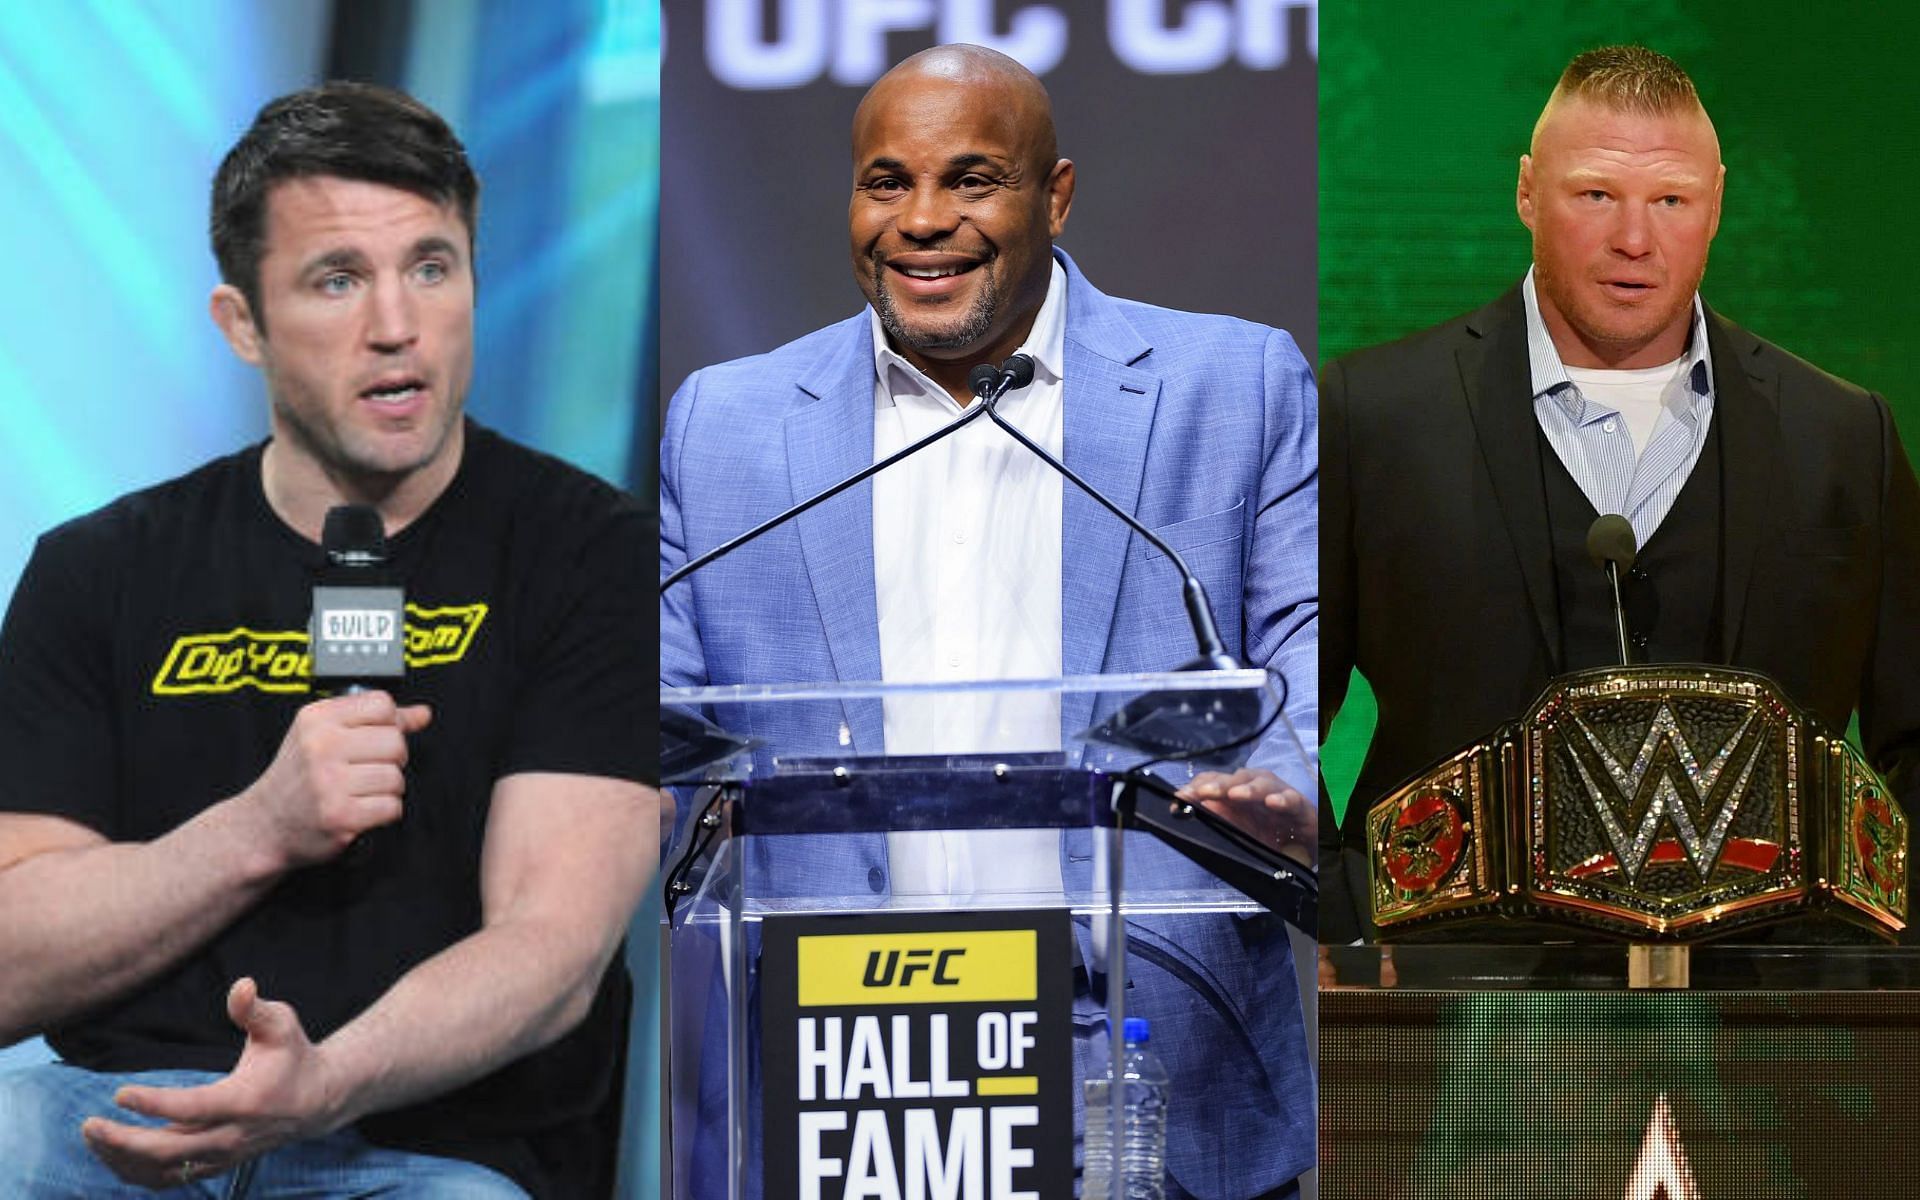 Chael Sonnen (left), Daniel Cormier (middle) and Brock Lesnar (right) 